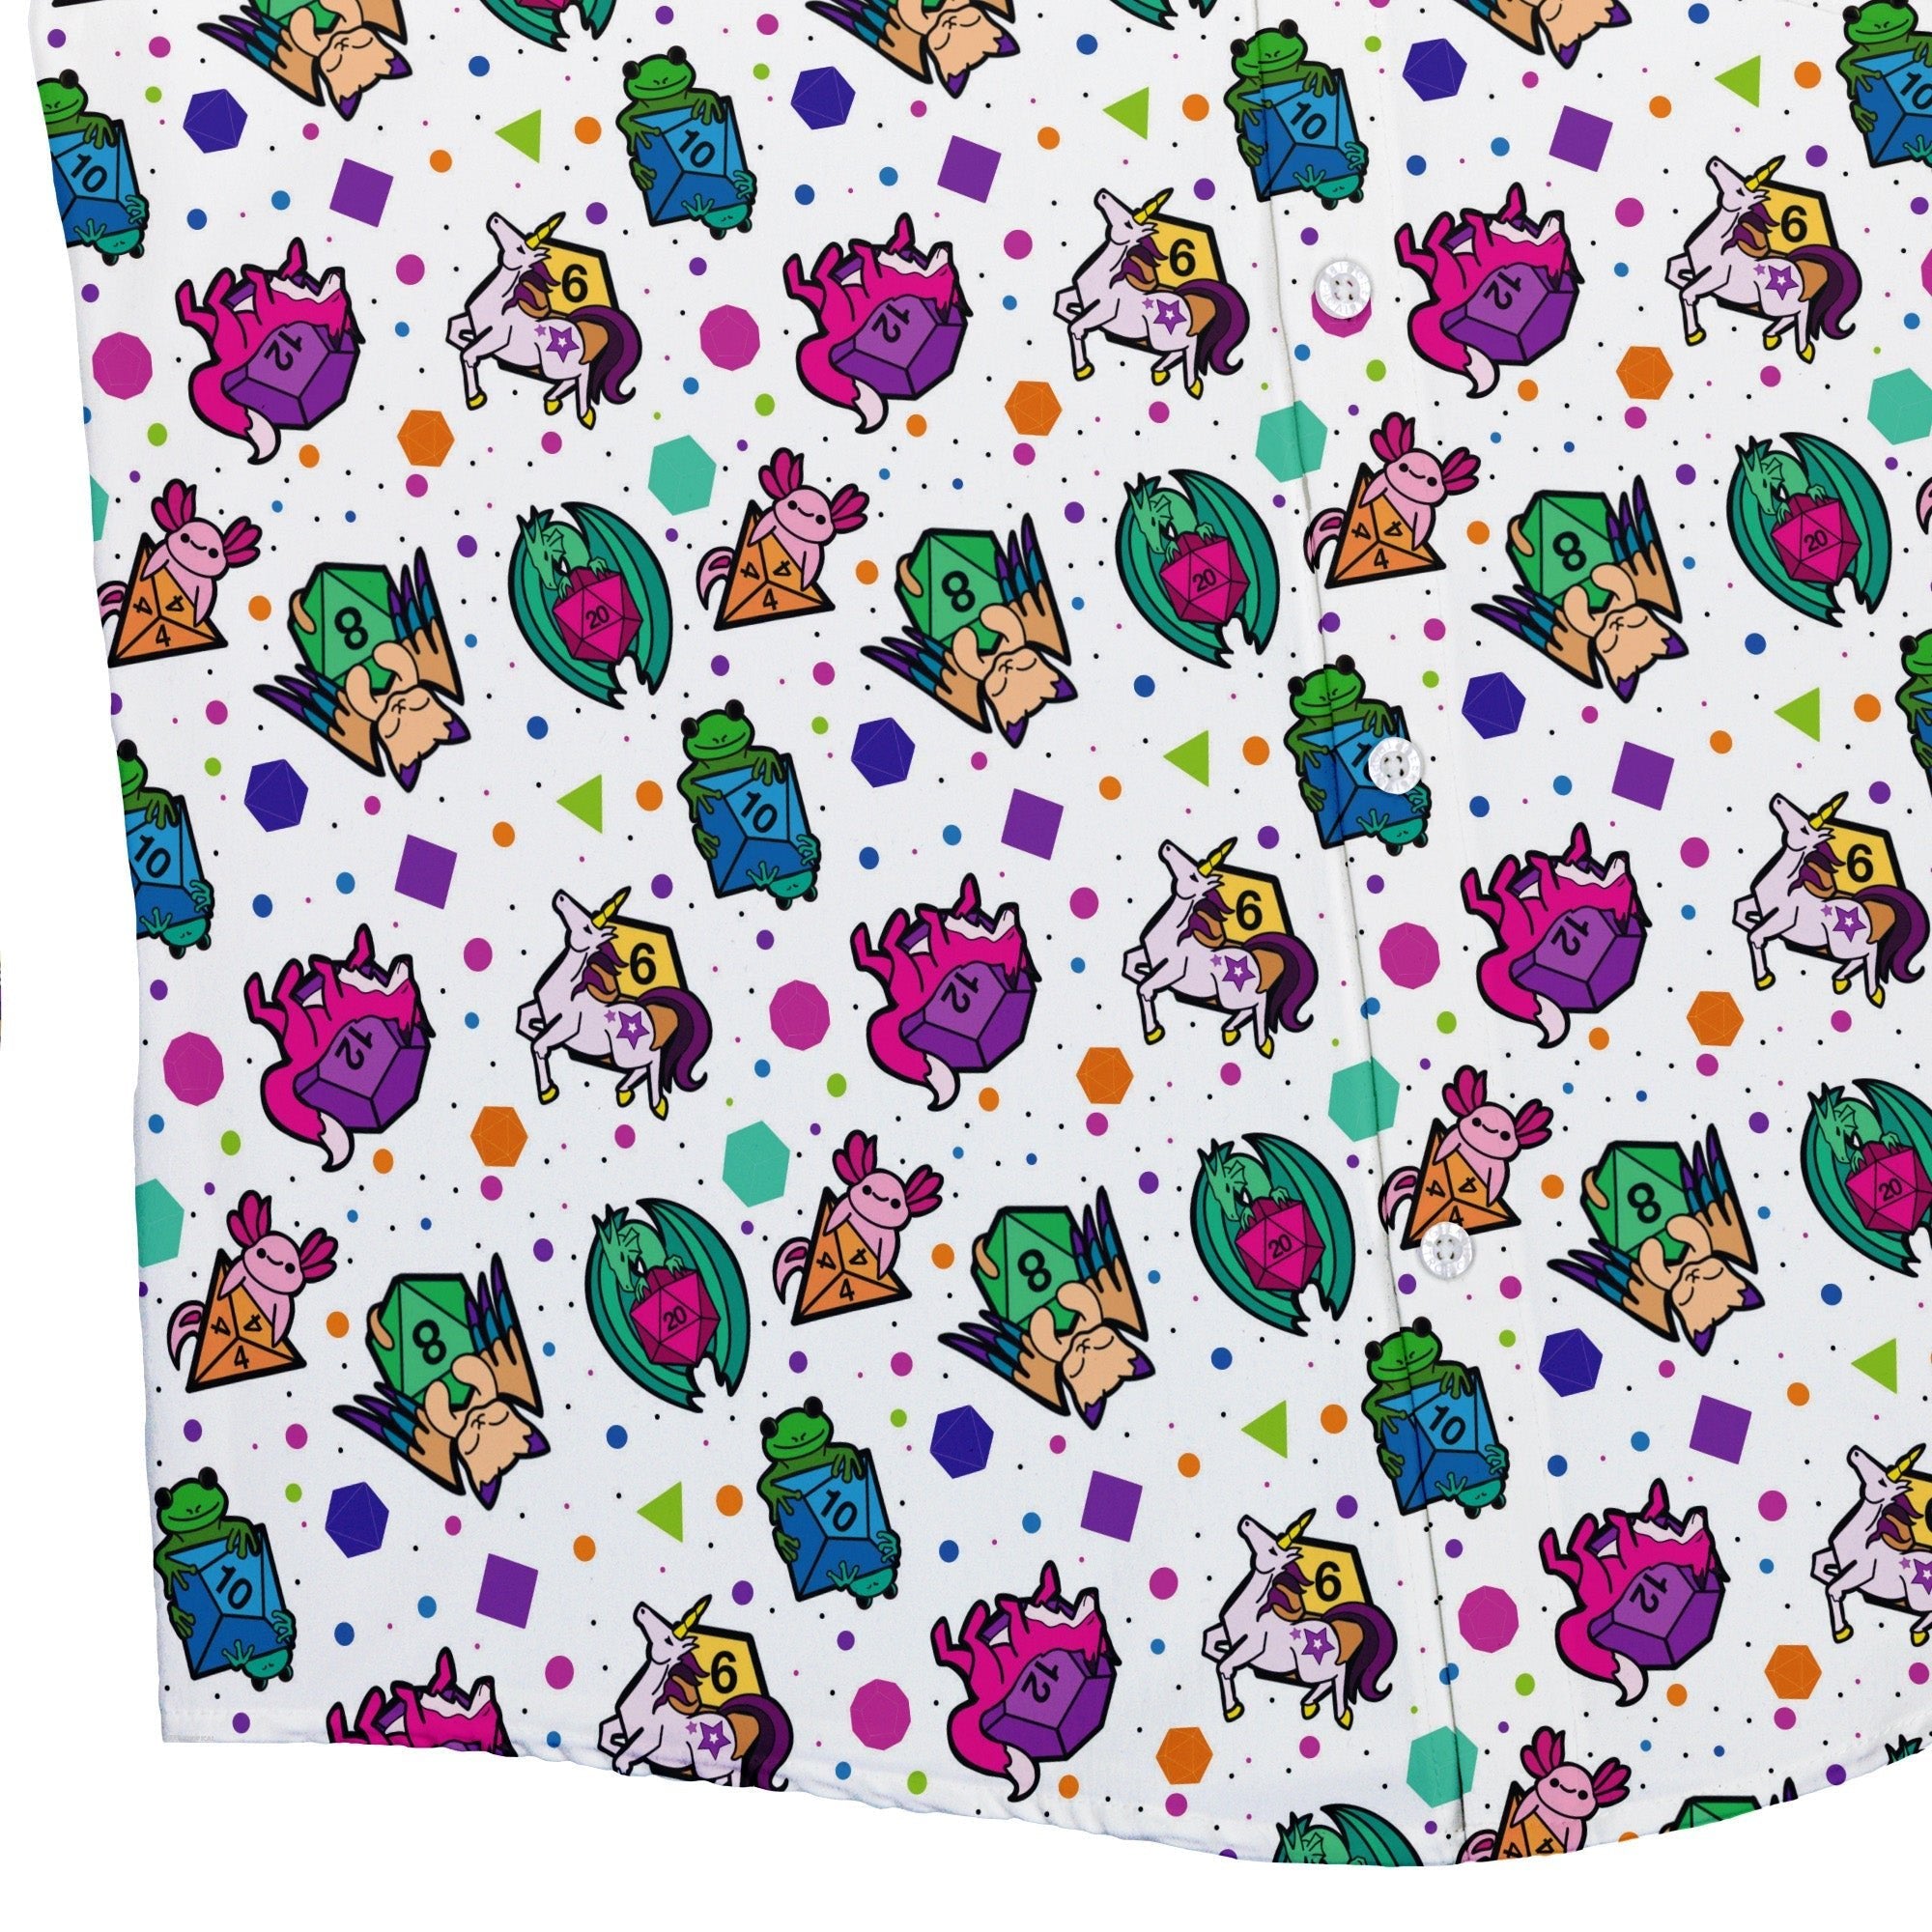 DND Dice Critters Colors Button Up Shirt - adult sizing - Animal Patterns - Designed by Rose Khan